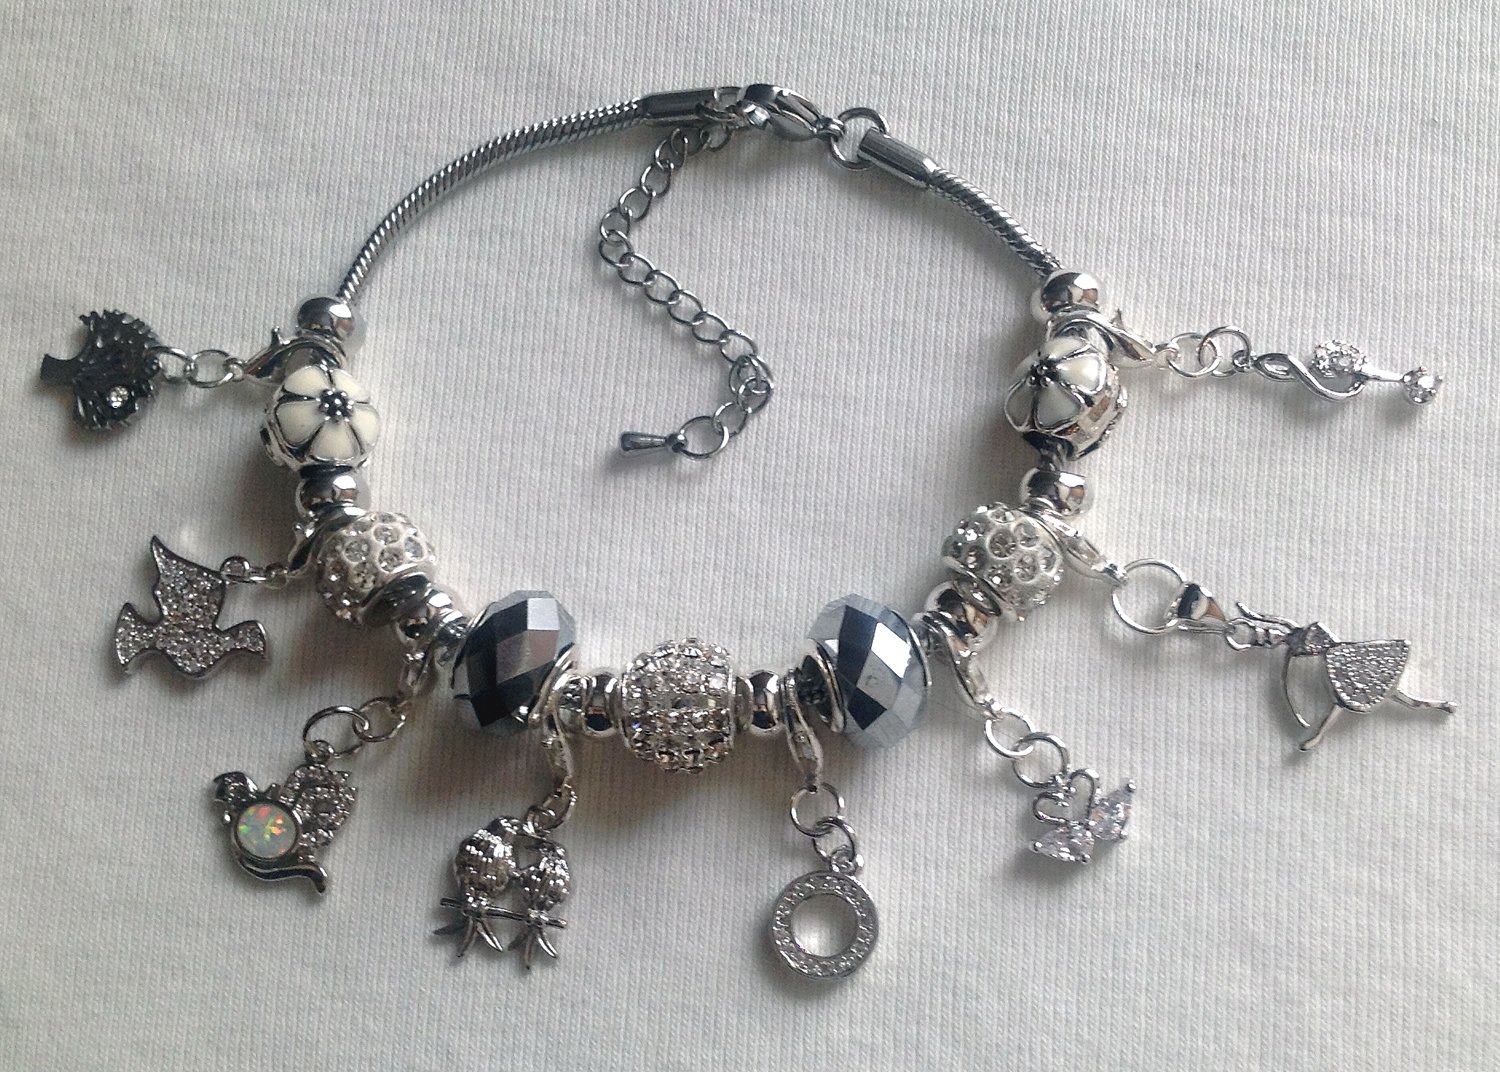 Days of Christmas Cubic Zirconia European Style Charm Bracelet in Silver and White